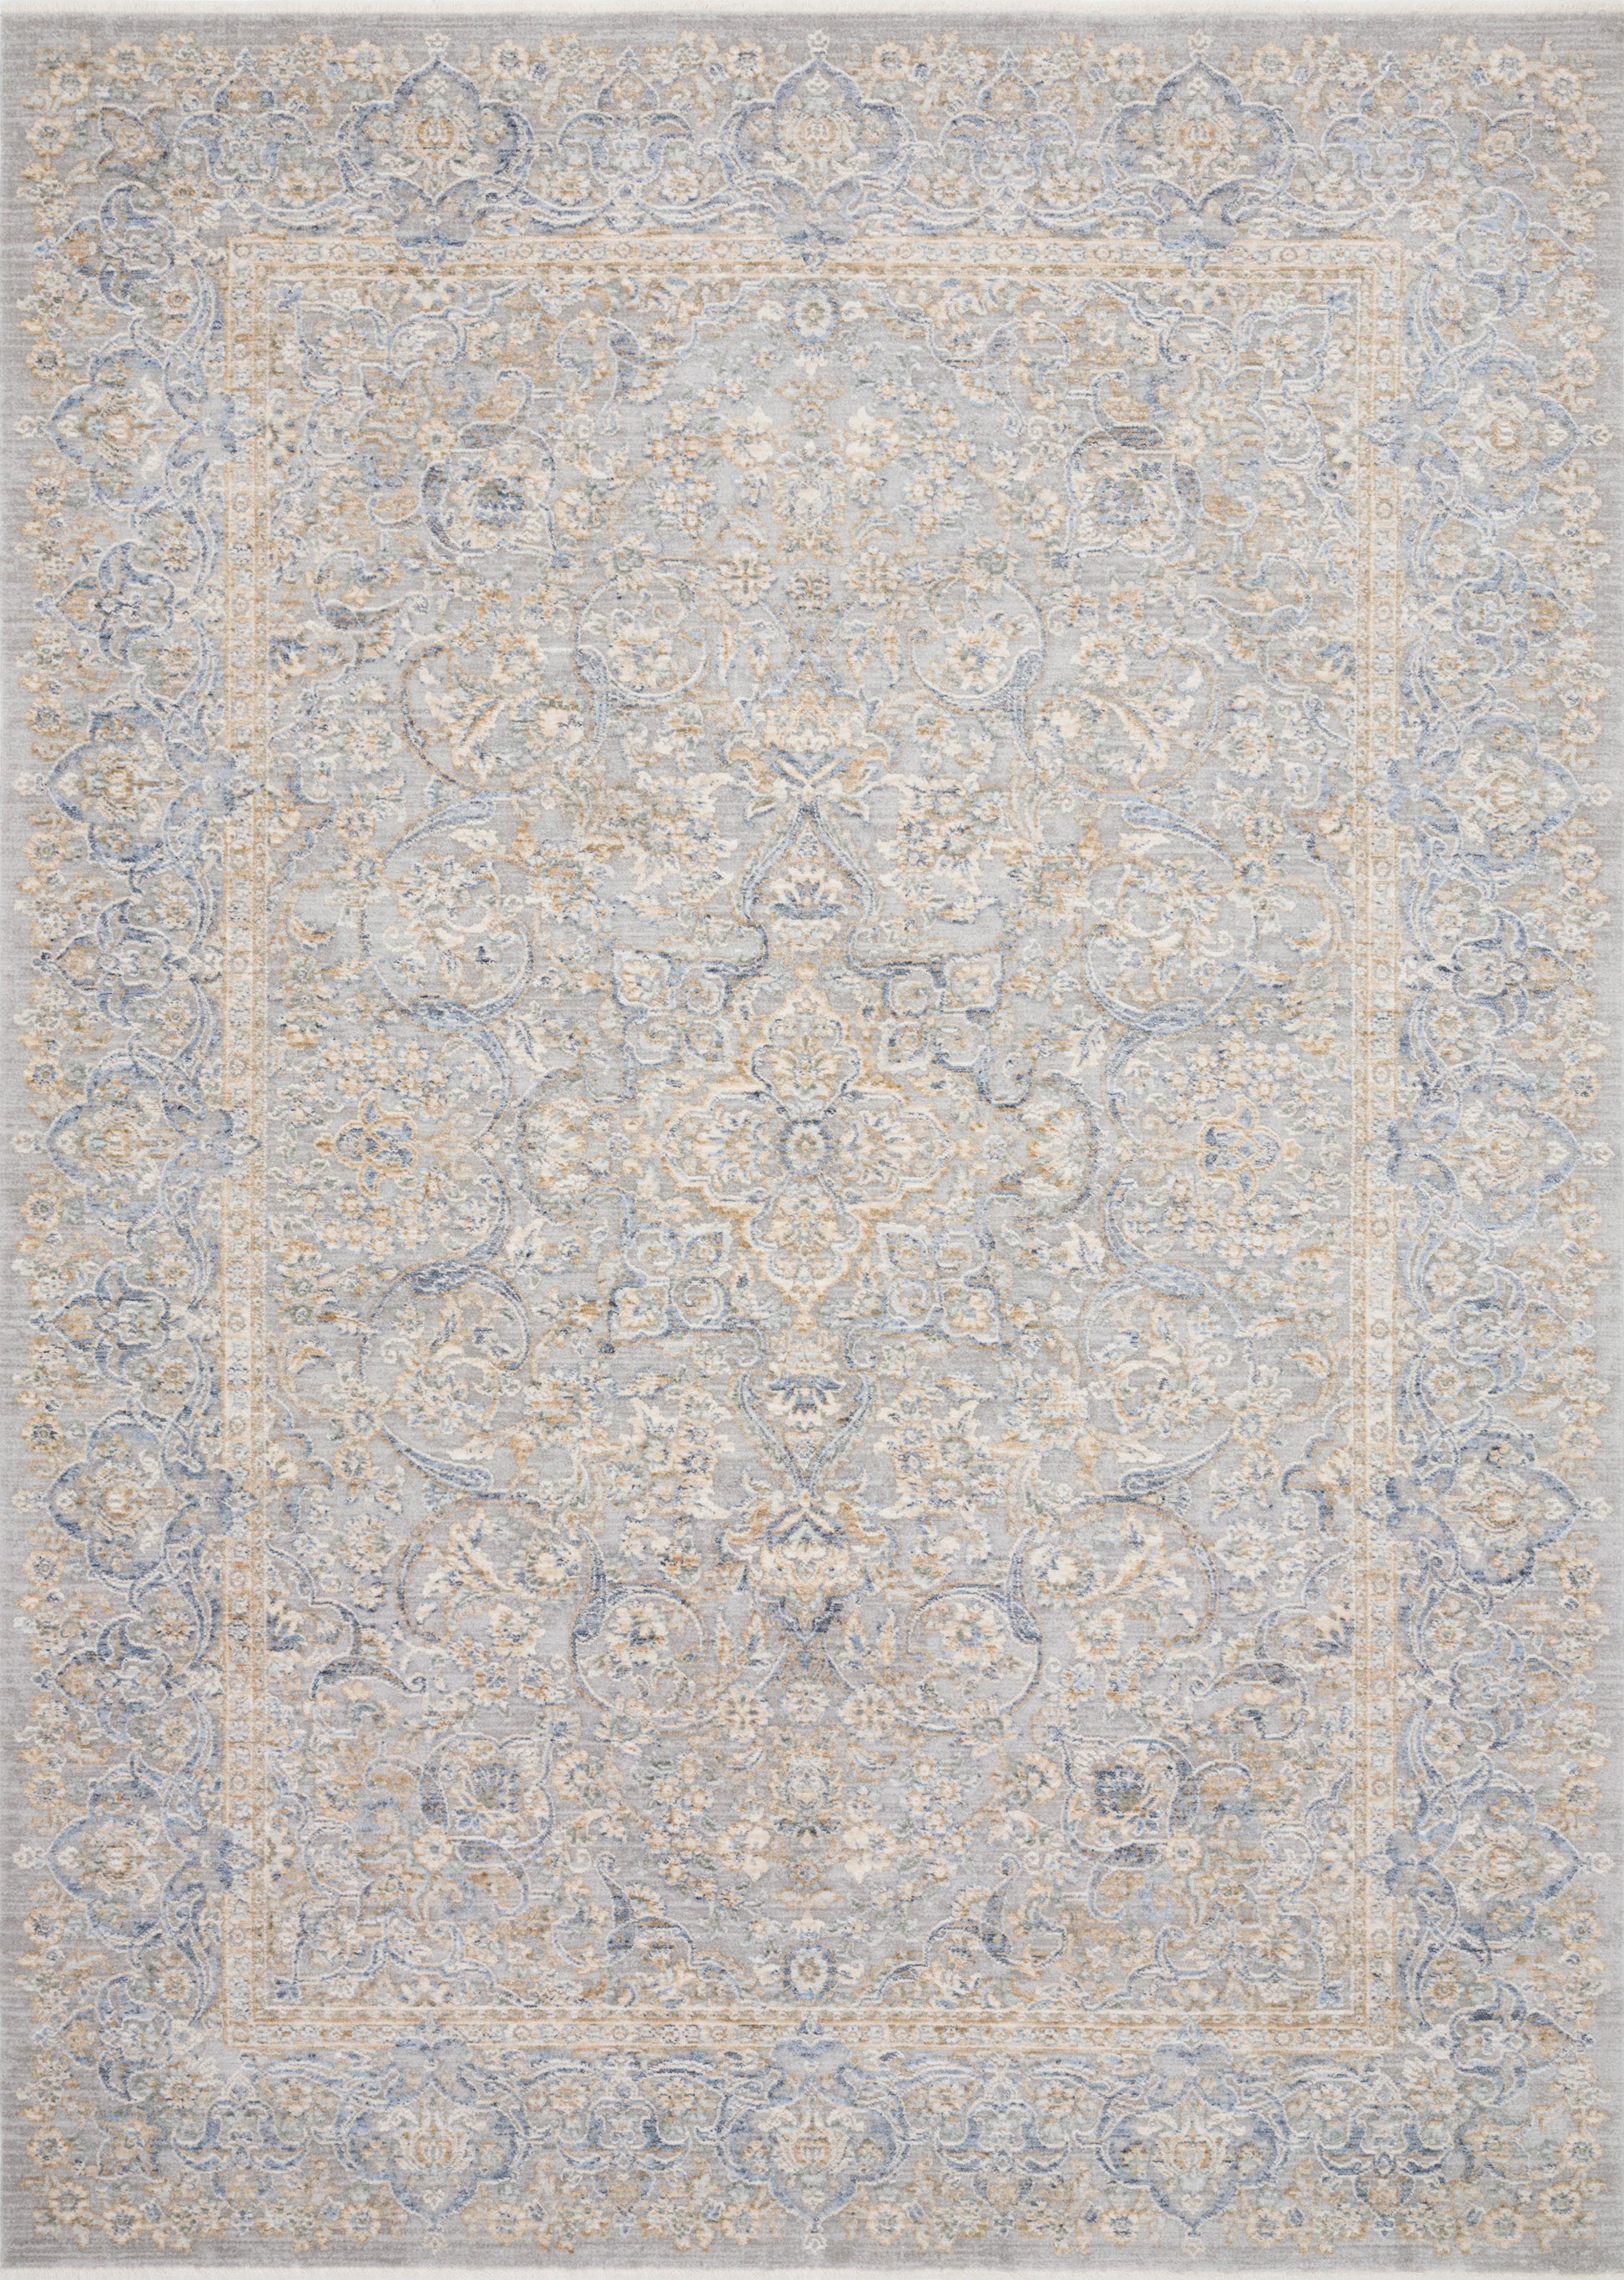 A picture of Loloi's Pandora rug, in style PAN-01, color Stone / Gold